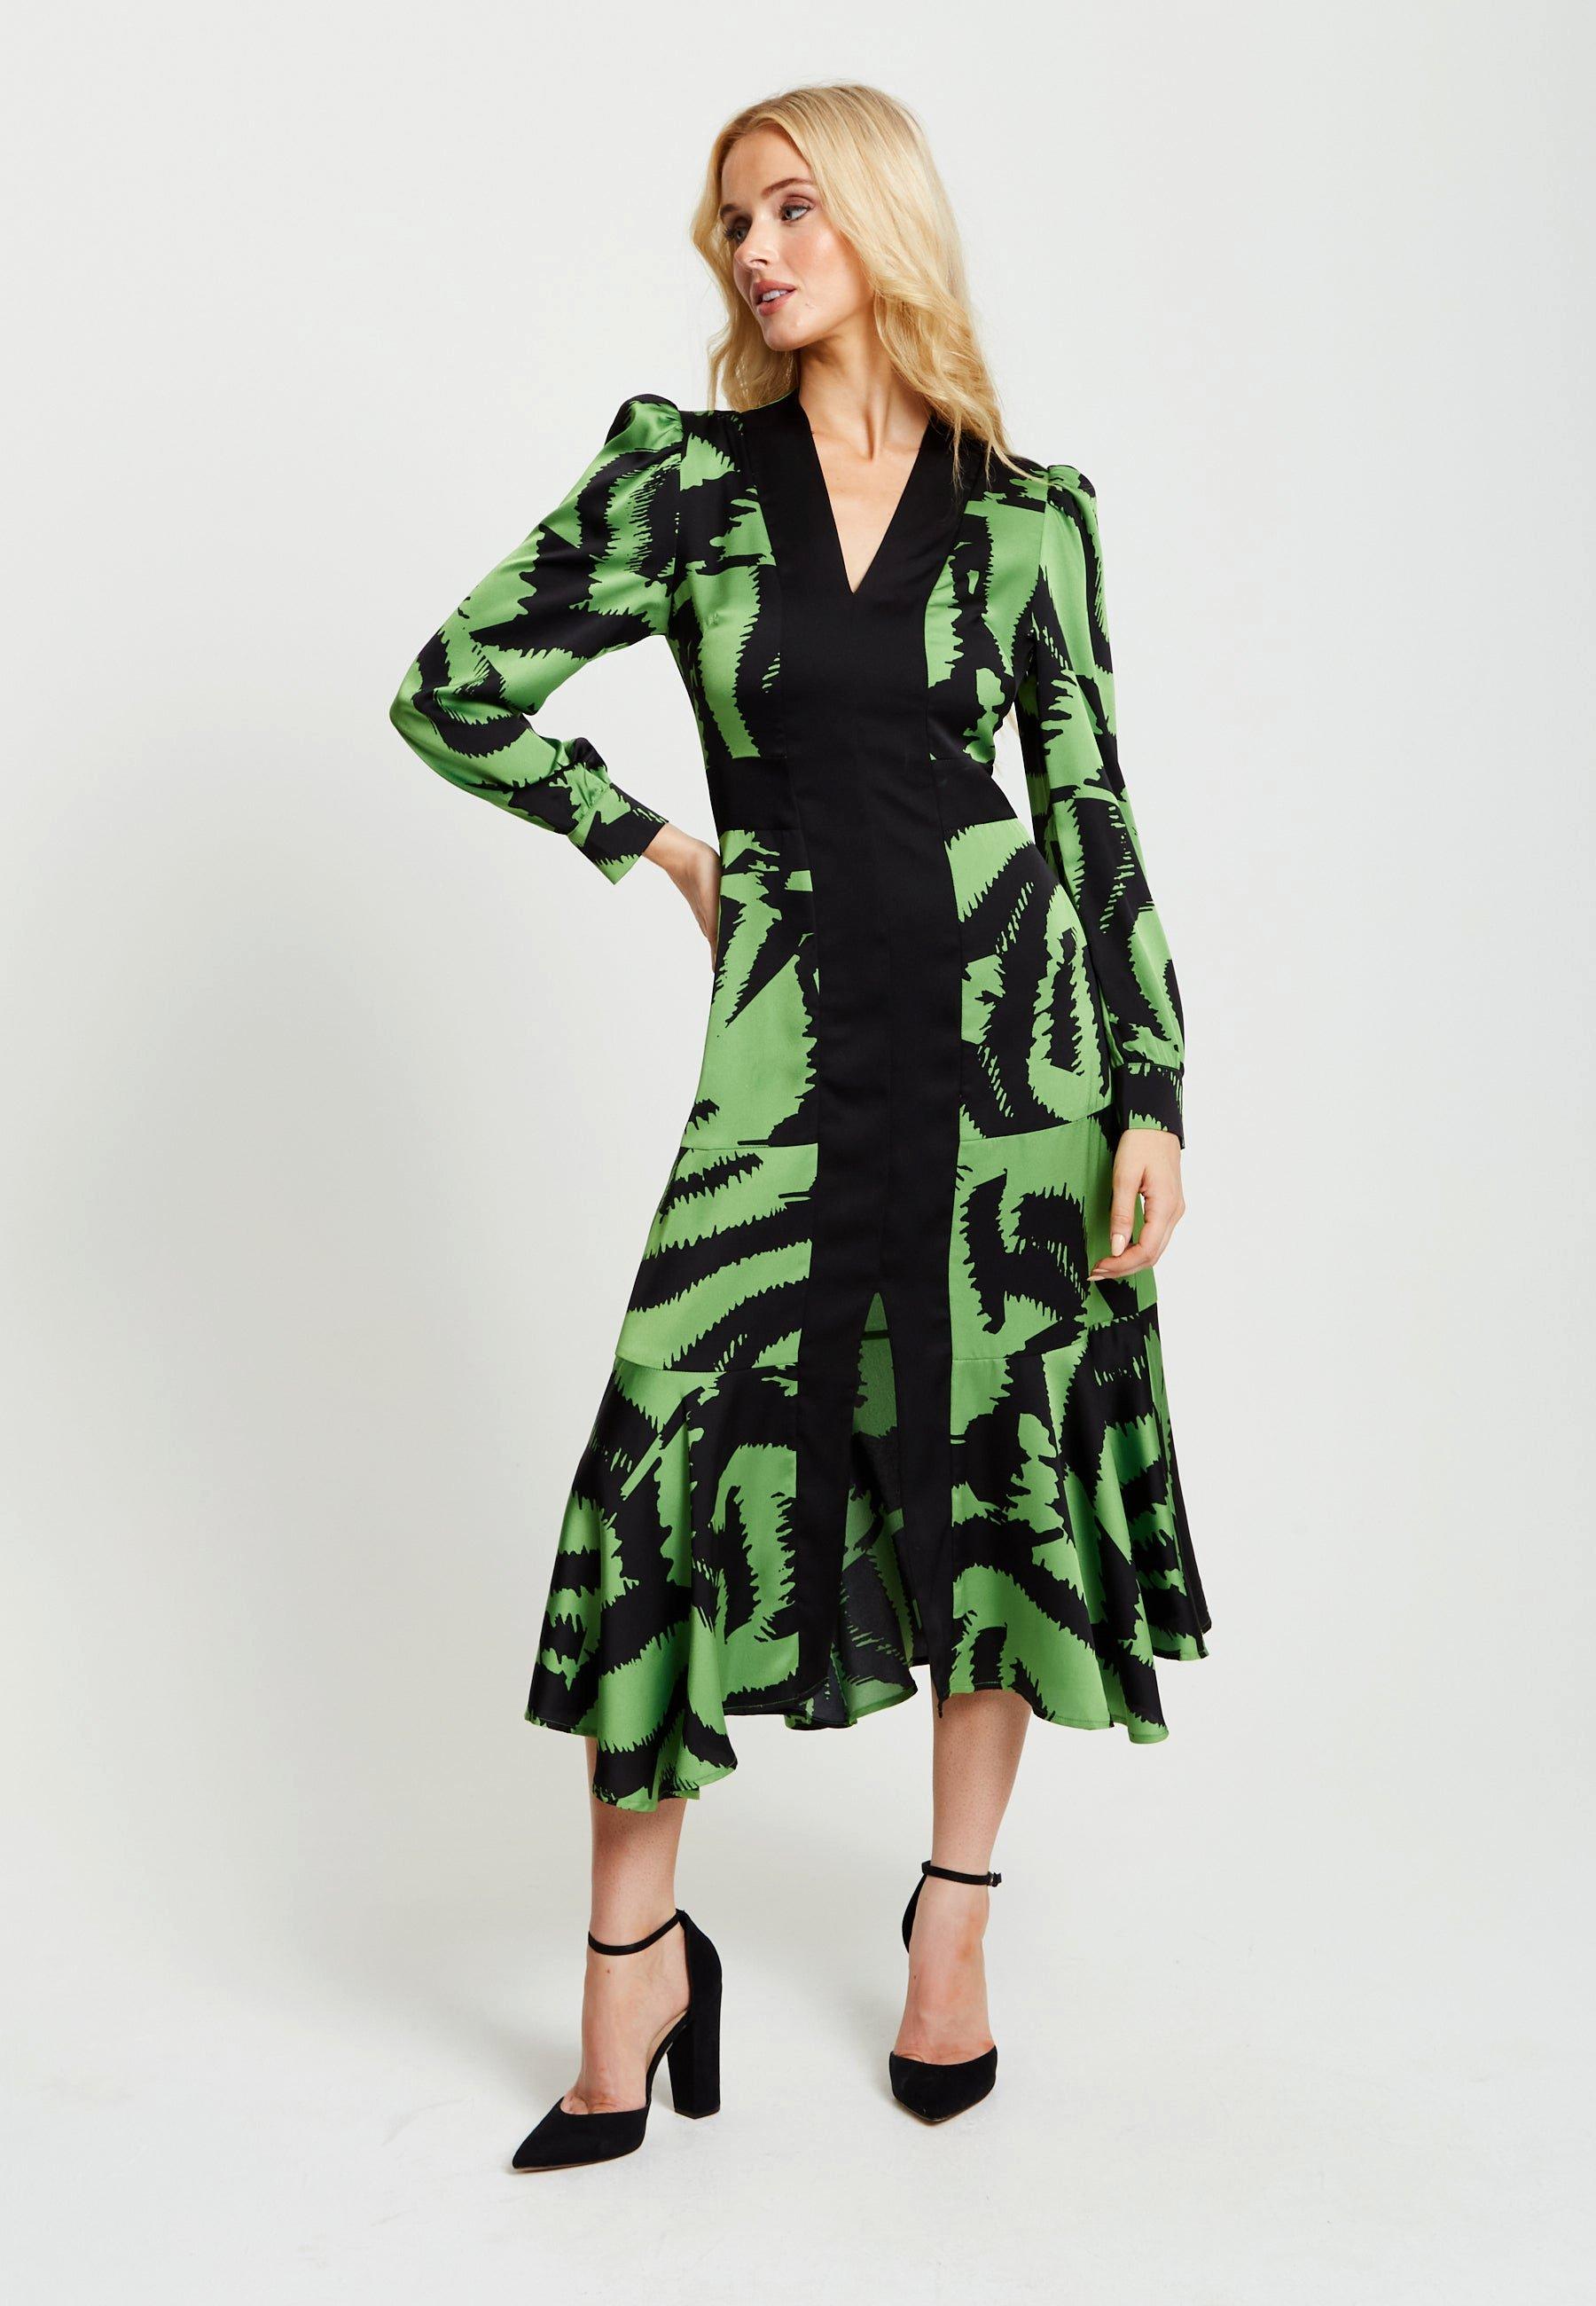 Zebra Print Midi Dress With Front Slit And Long Sleeves